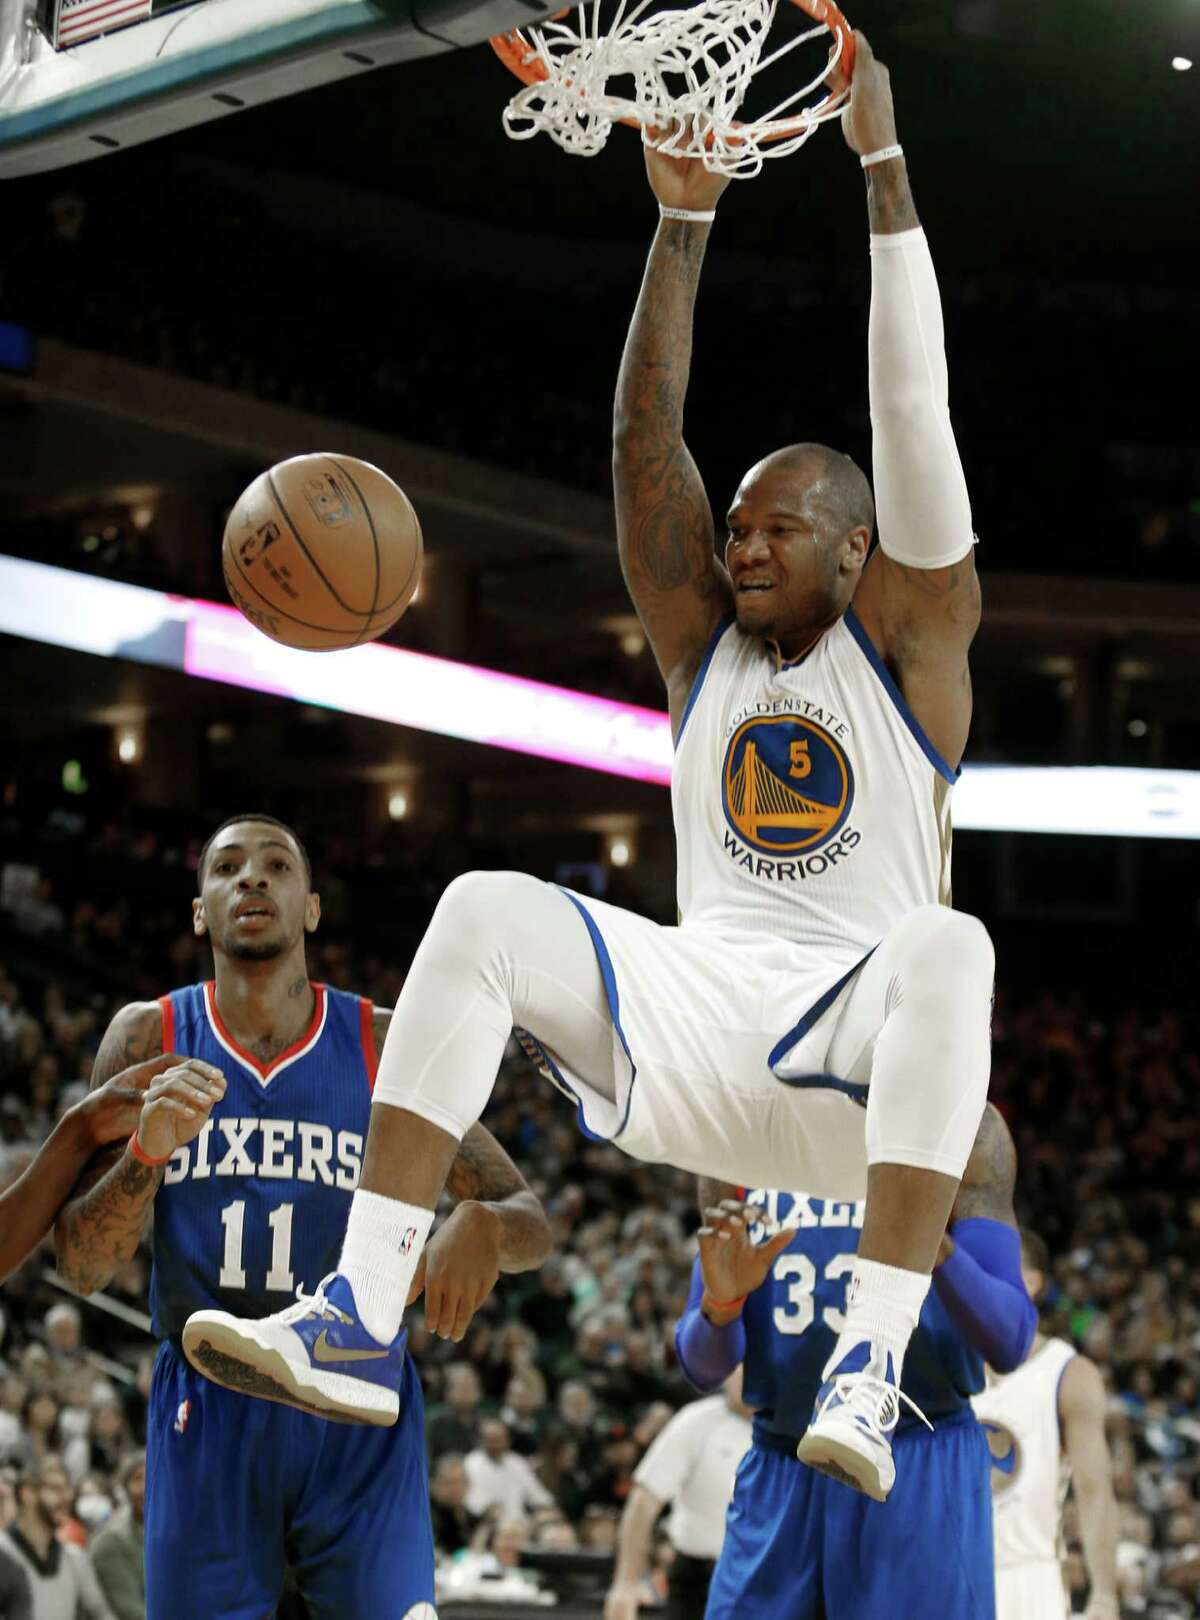 Center-forward Marreese Speights has posted career highs in points (12.6 per game) and field-goal shooting, stepping up when the team was without big men David Lee (24 games) and Andrew Bogut (12).